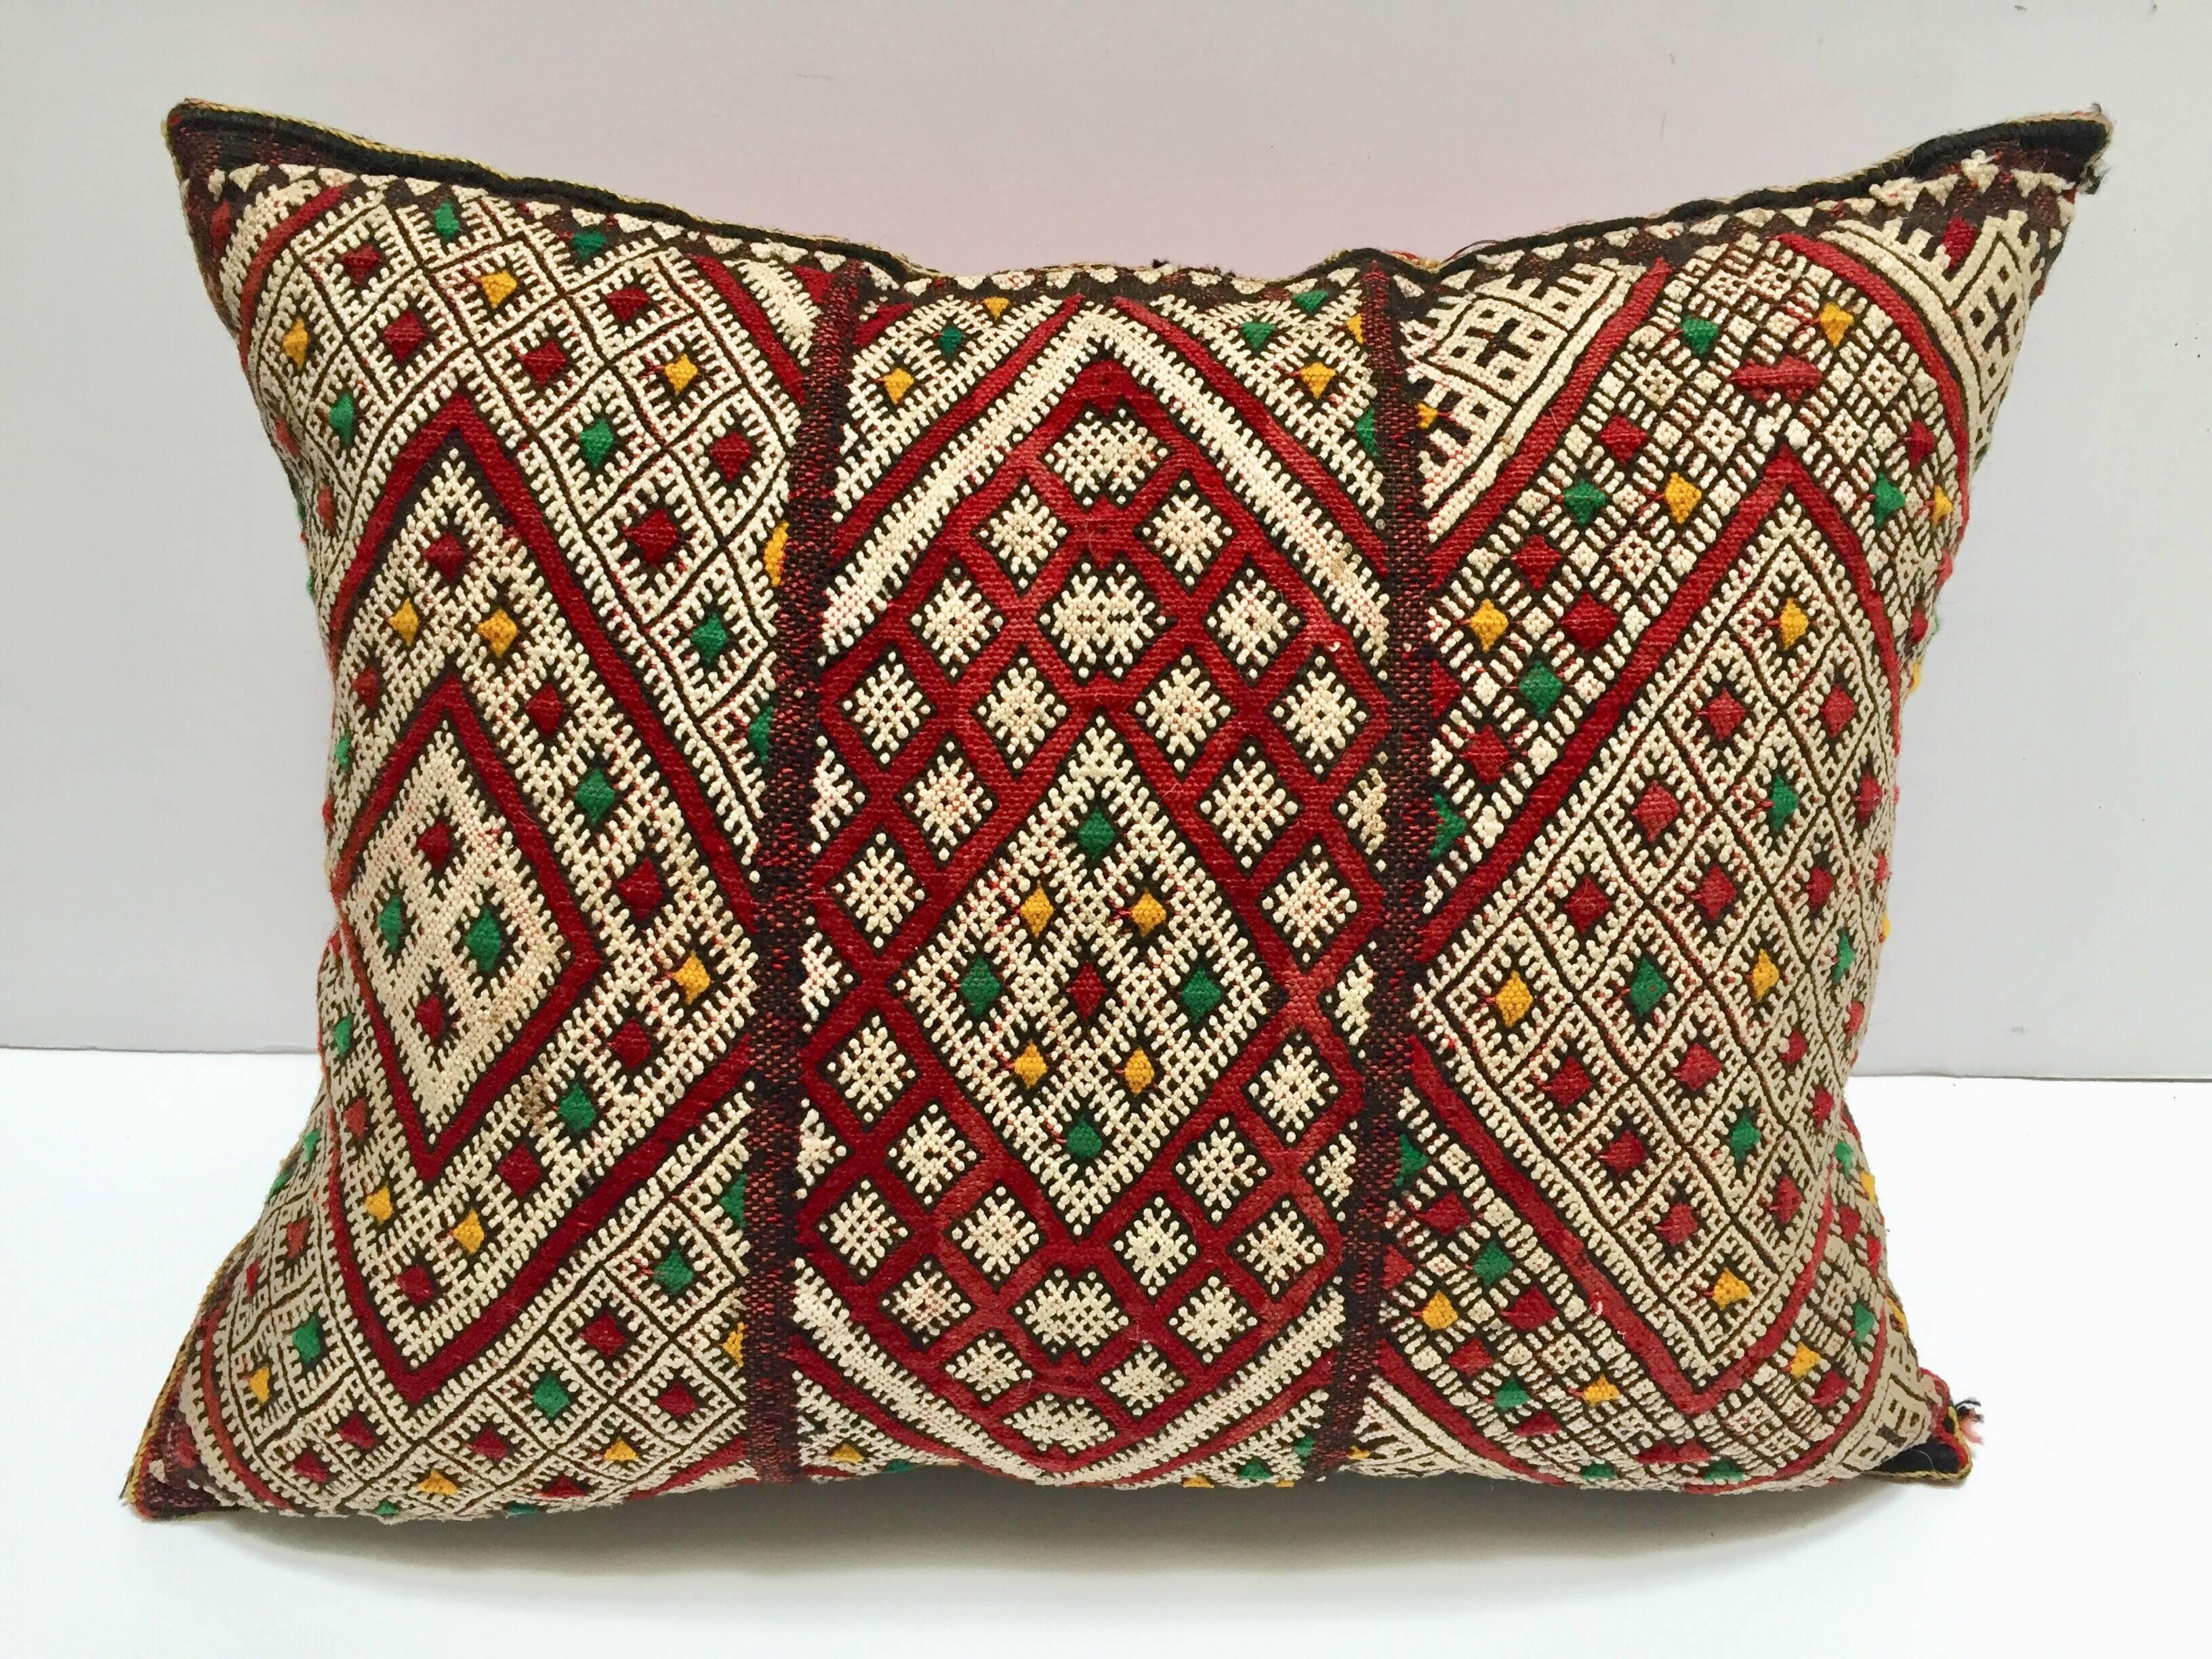 Moroccan Berber pillow with geometric tribal African designs.
Handwoven tribal throw pillow made from a vintage flat-weave rug.
The front and the back are made from a different rug, front is more elaborate and back is burnt orange.
Handwoven by